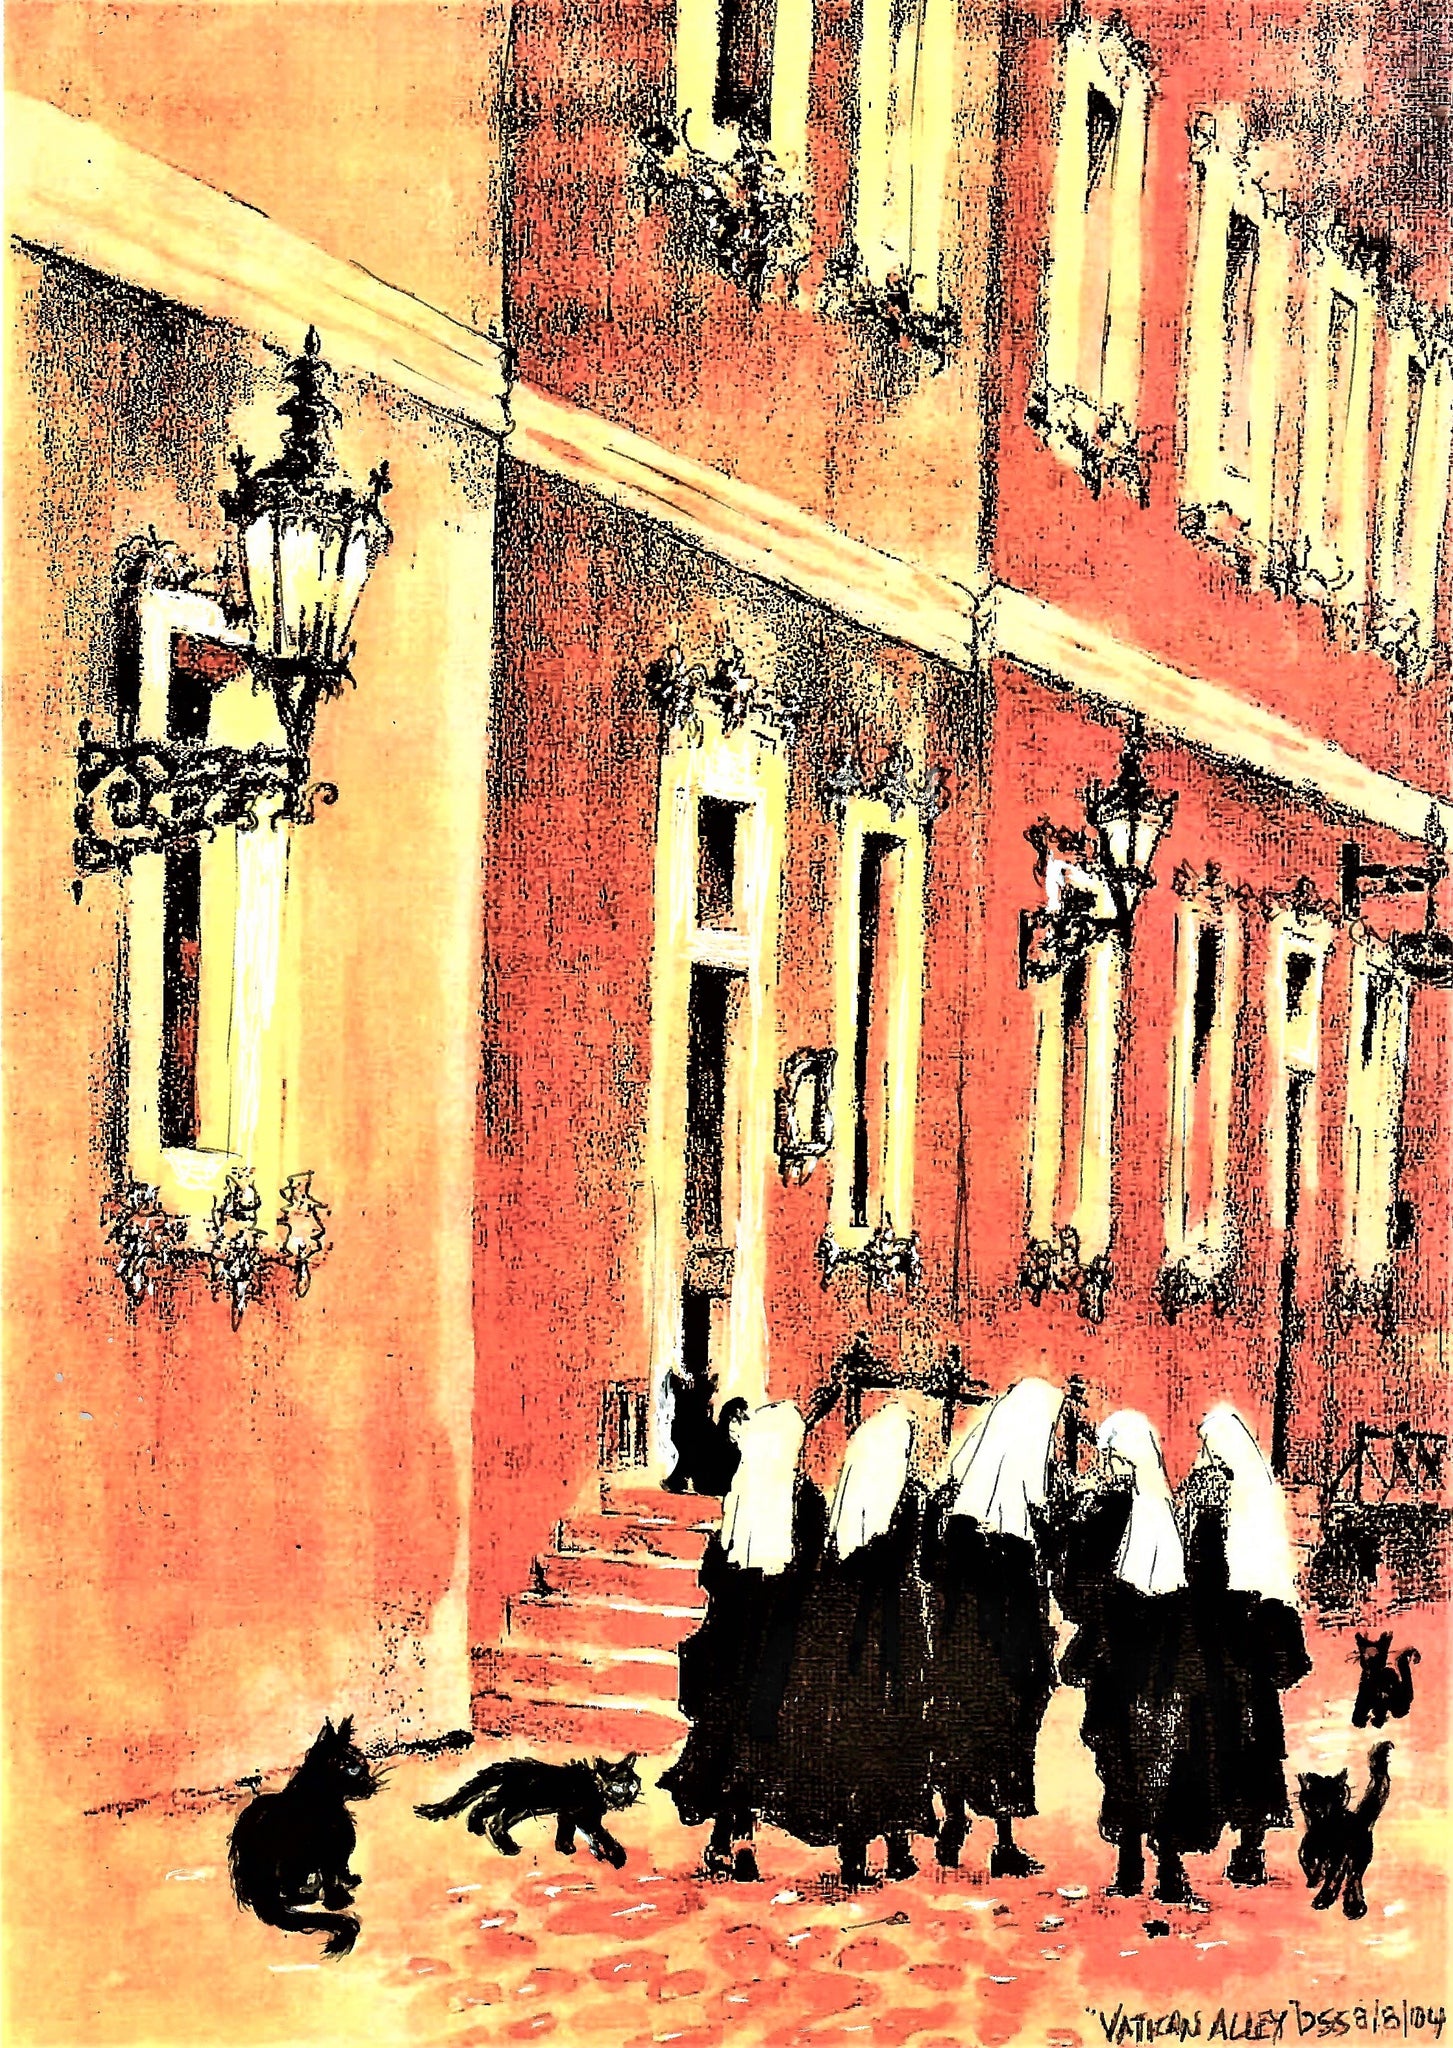 Cats Following Their Nuns Walking In The Alley Behind The Vatican